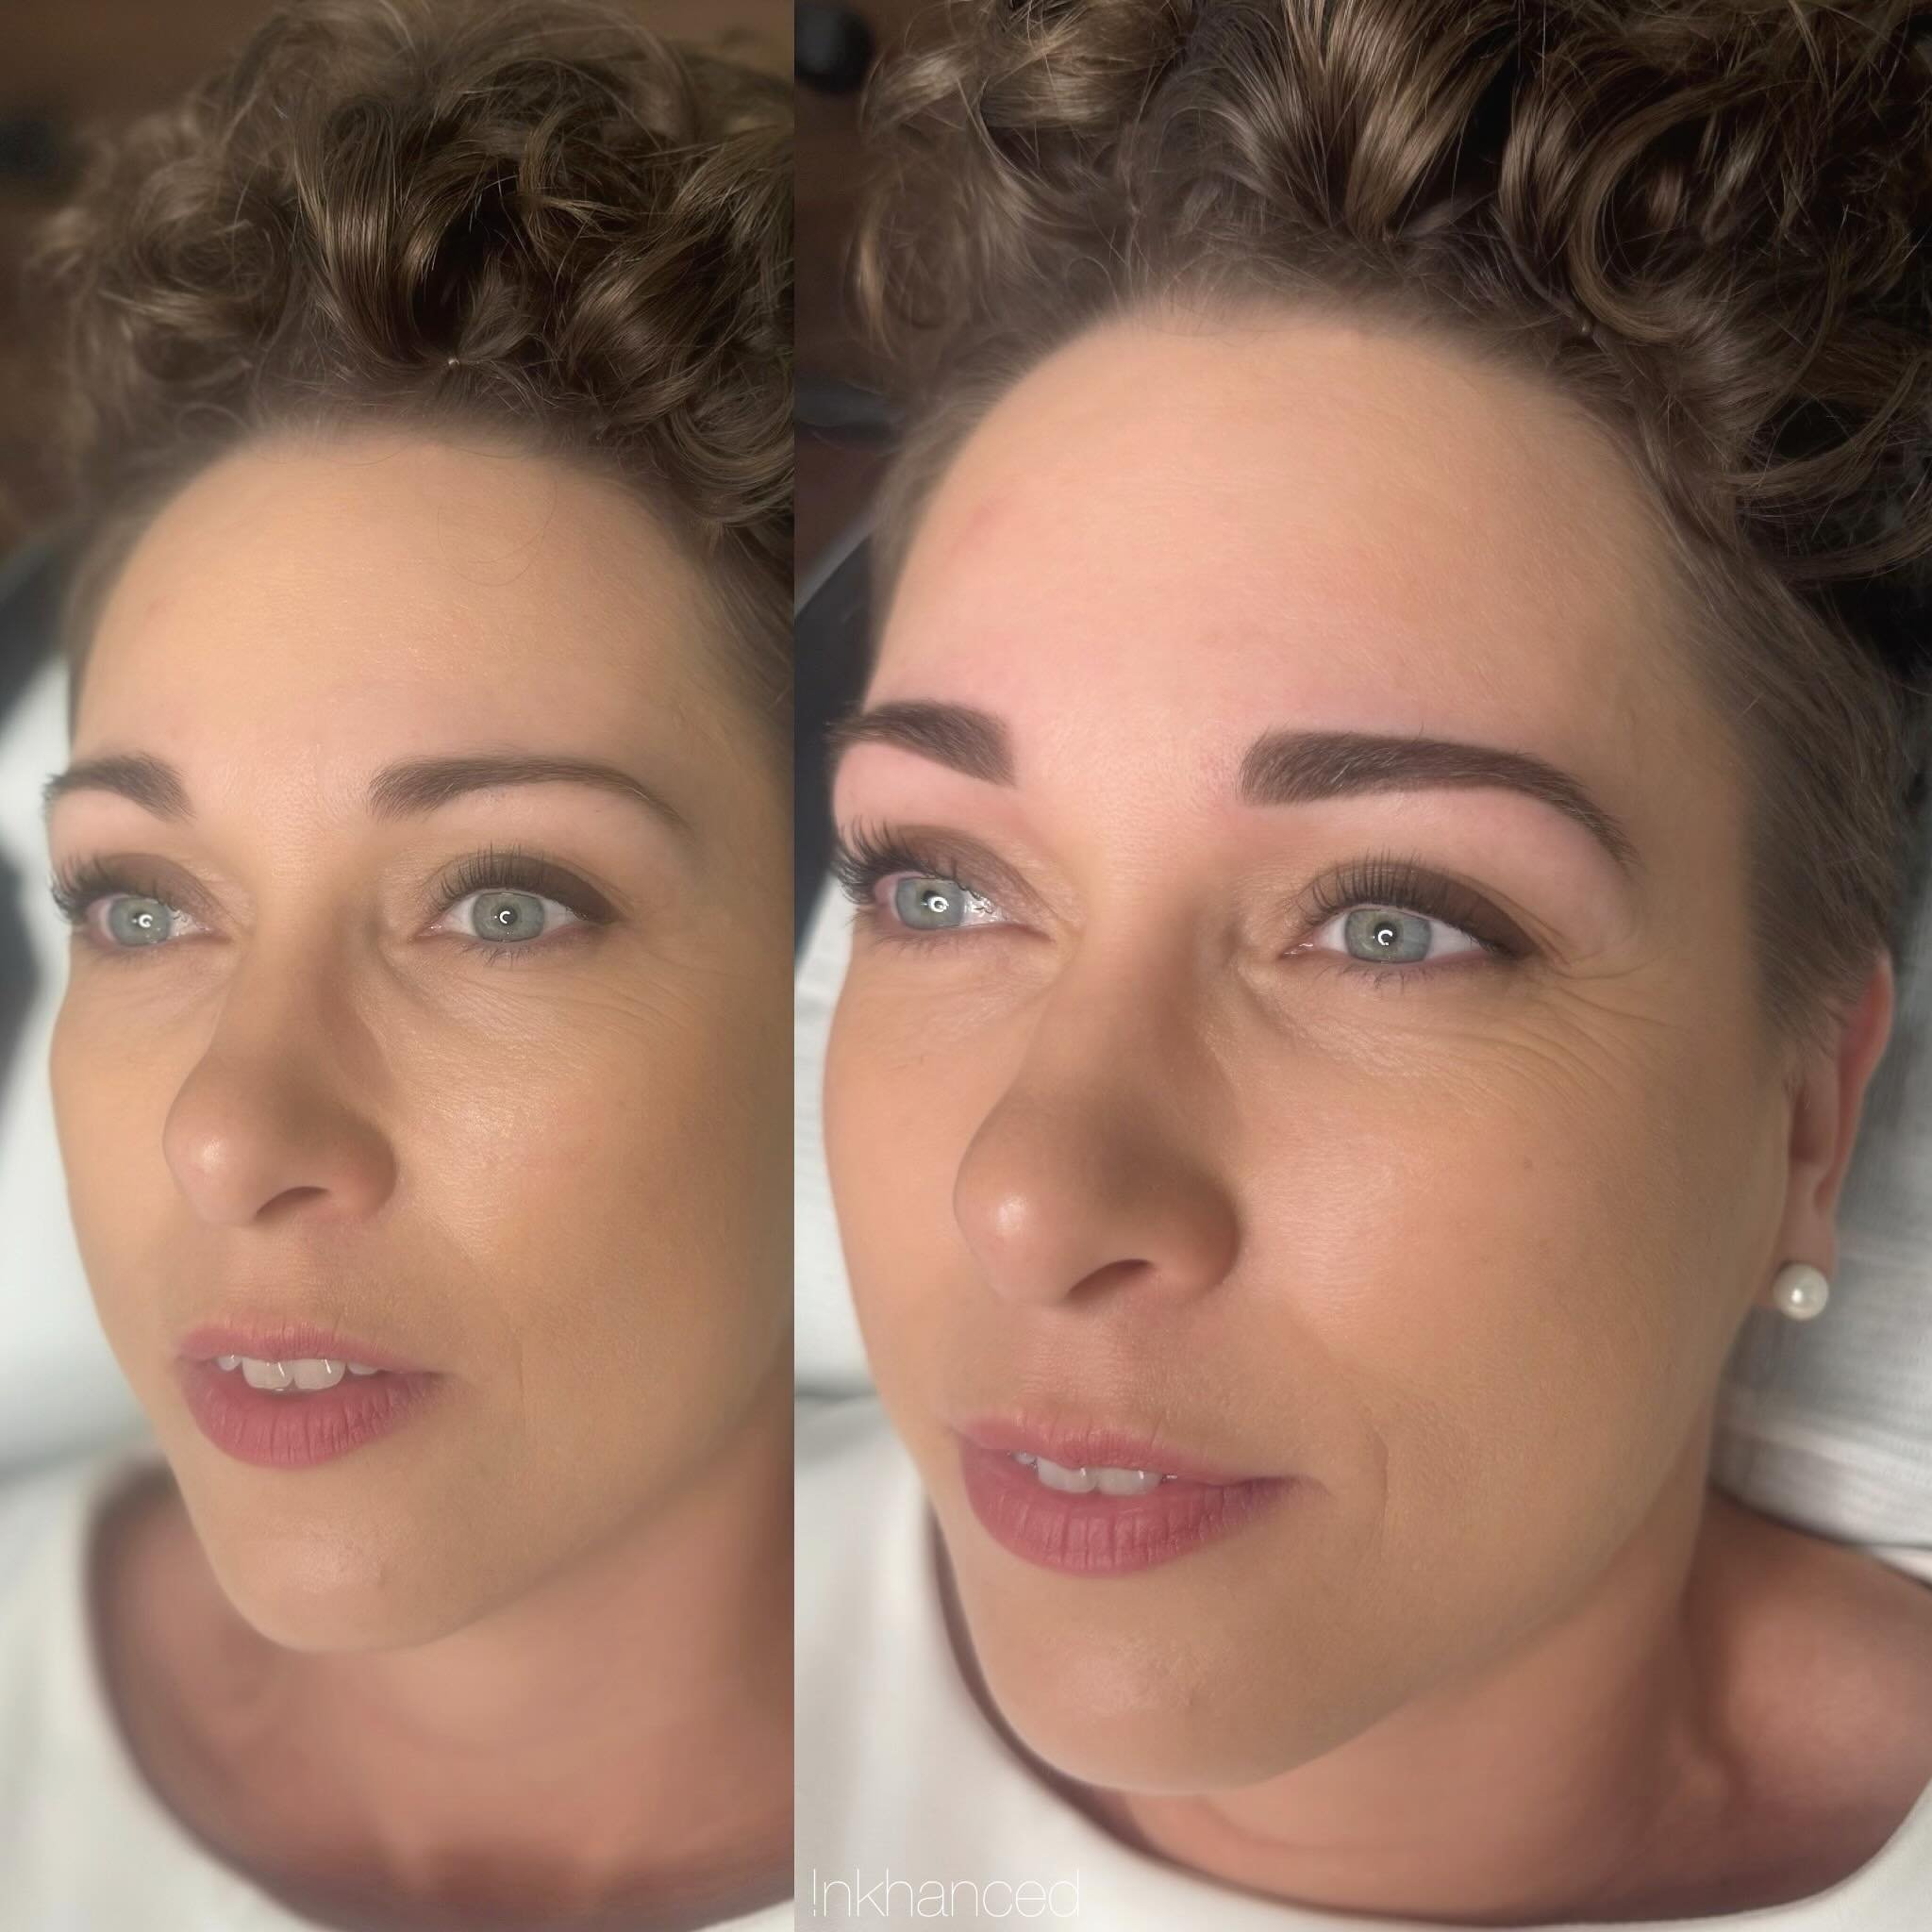 Her brows but better 🤍

Subtle brow enhancement using the &ldquo;powder technique&rdquo;. 
This helps to add, define and improve symmetry.
We use shades that complement each clients hair colour and skin types. Also taking into consideration their ag